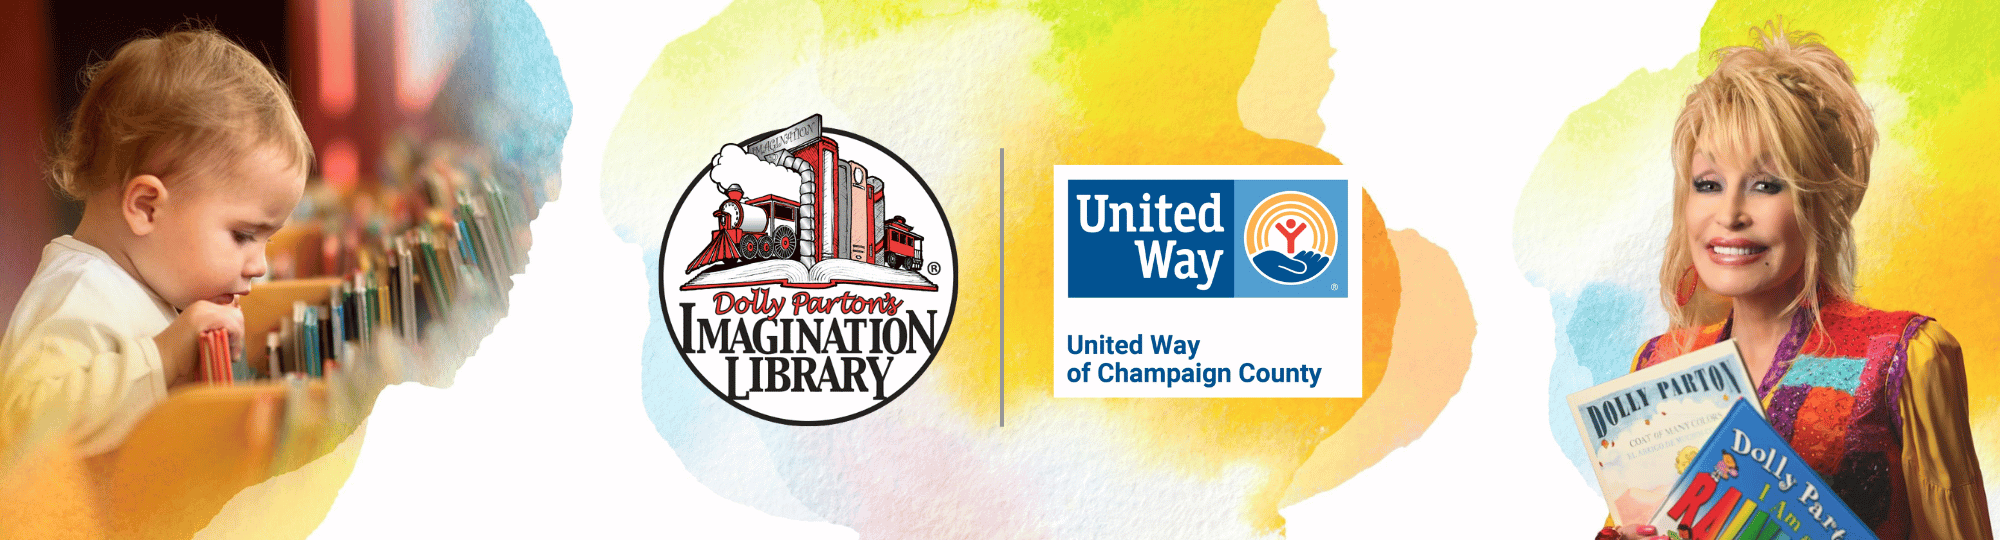 Dolly Parton Imagination Library logo and child reading books